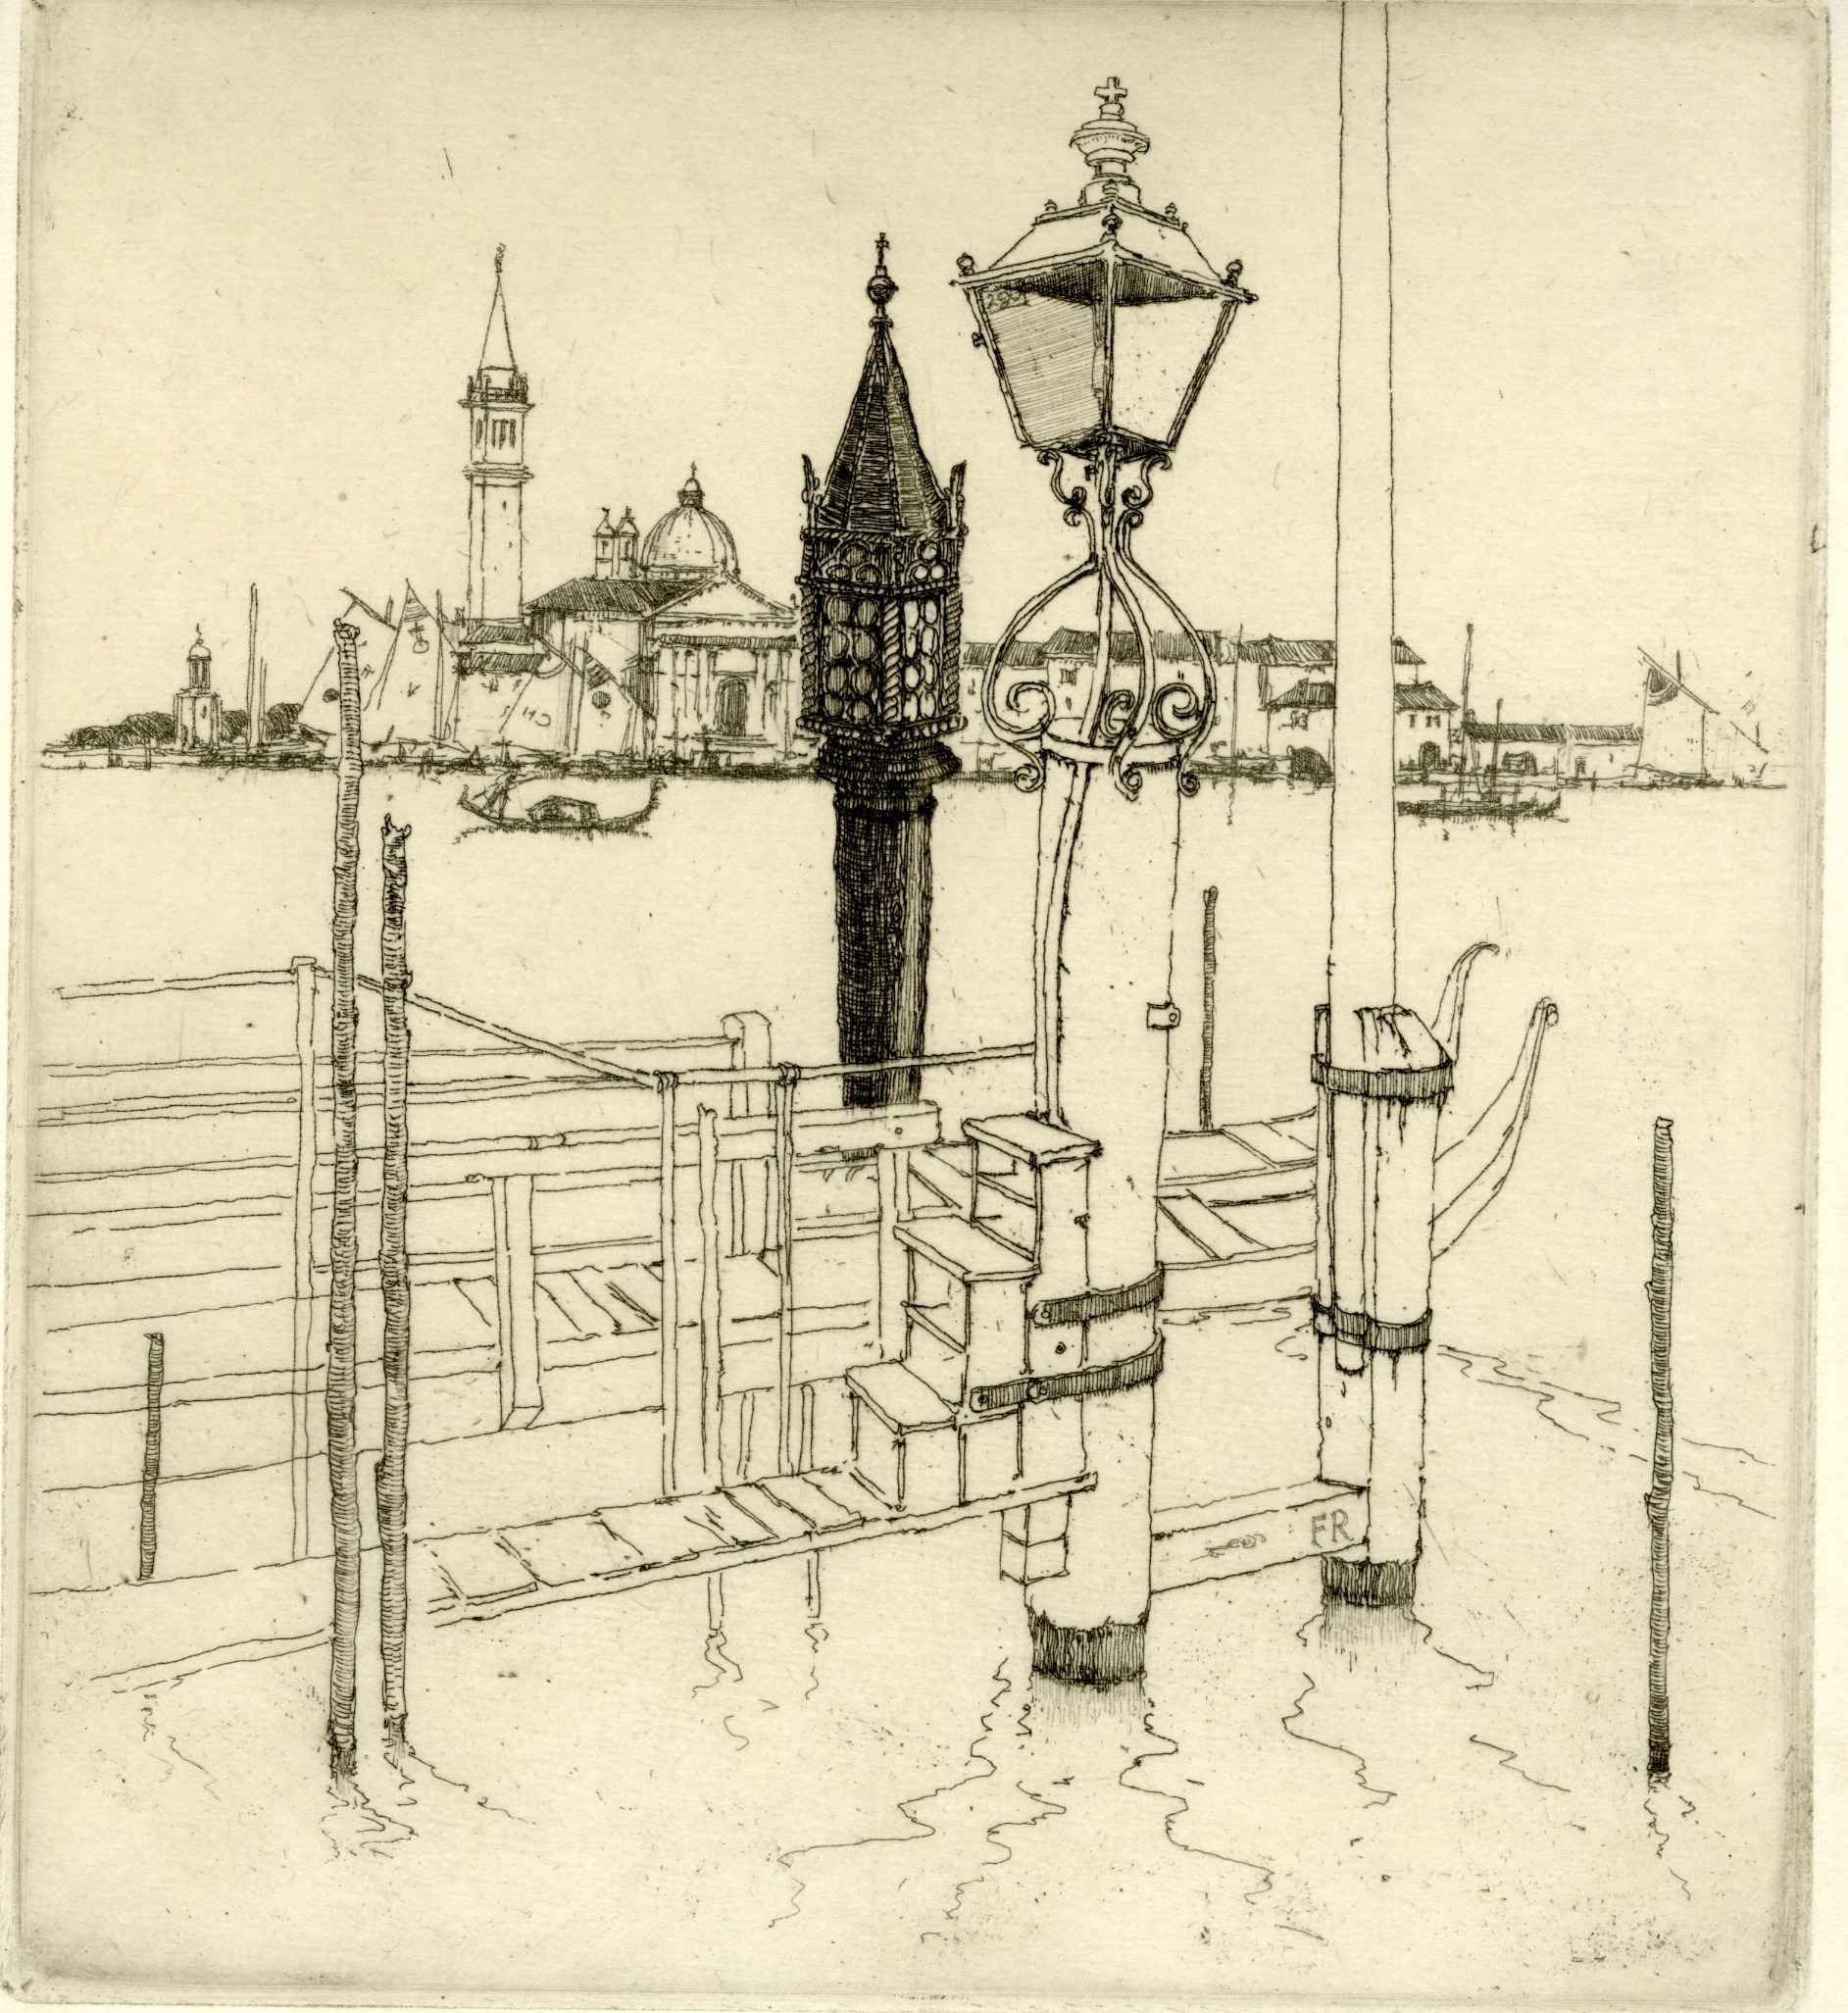 New lamps for old II (1925)